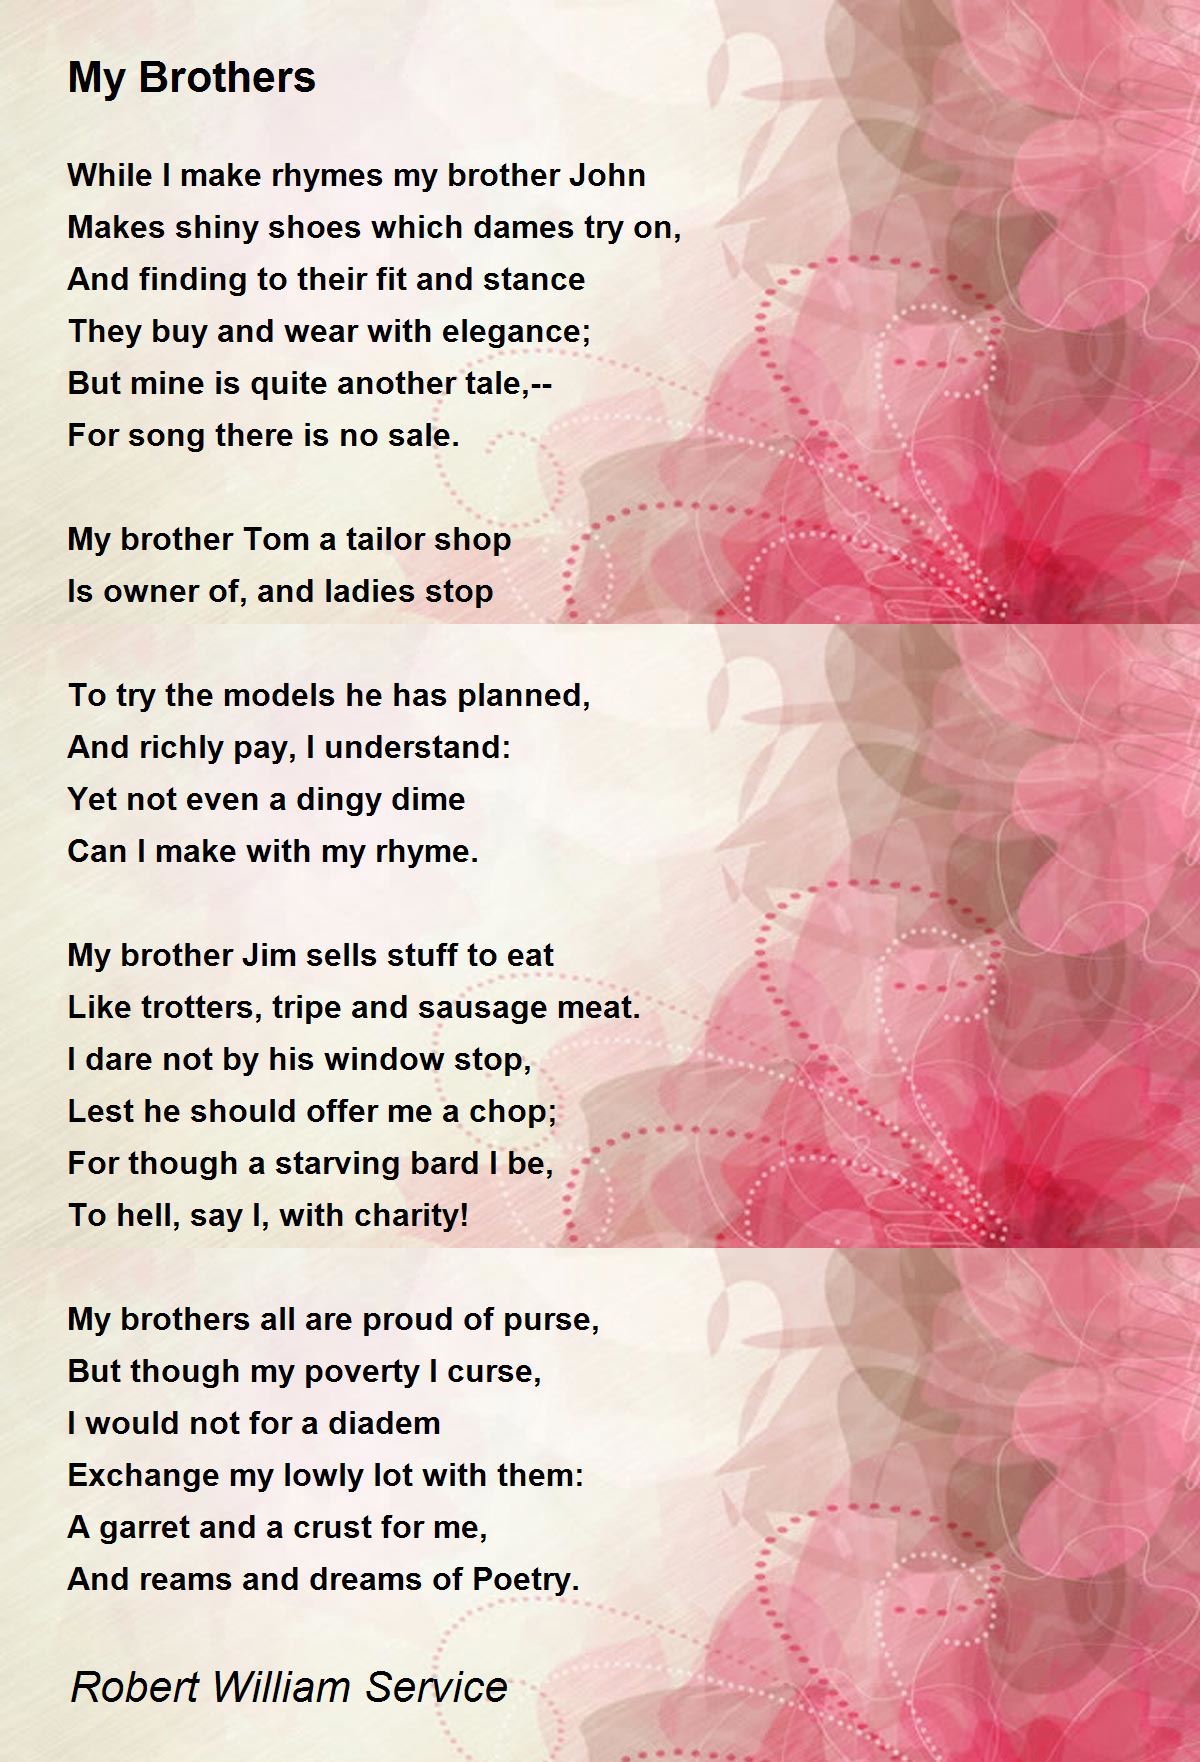 My Brothers Poem by Robert William Service - Poem Hunter